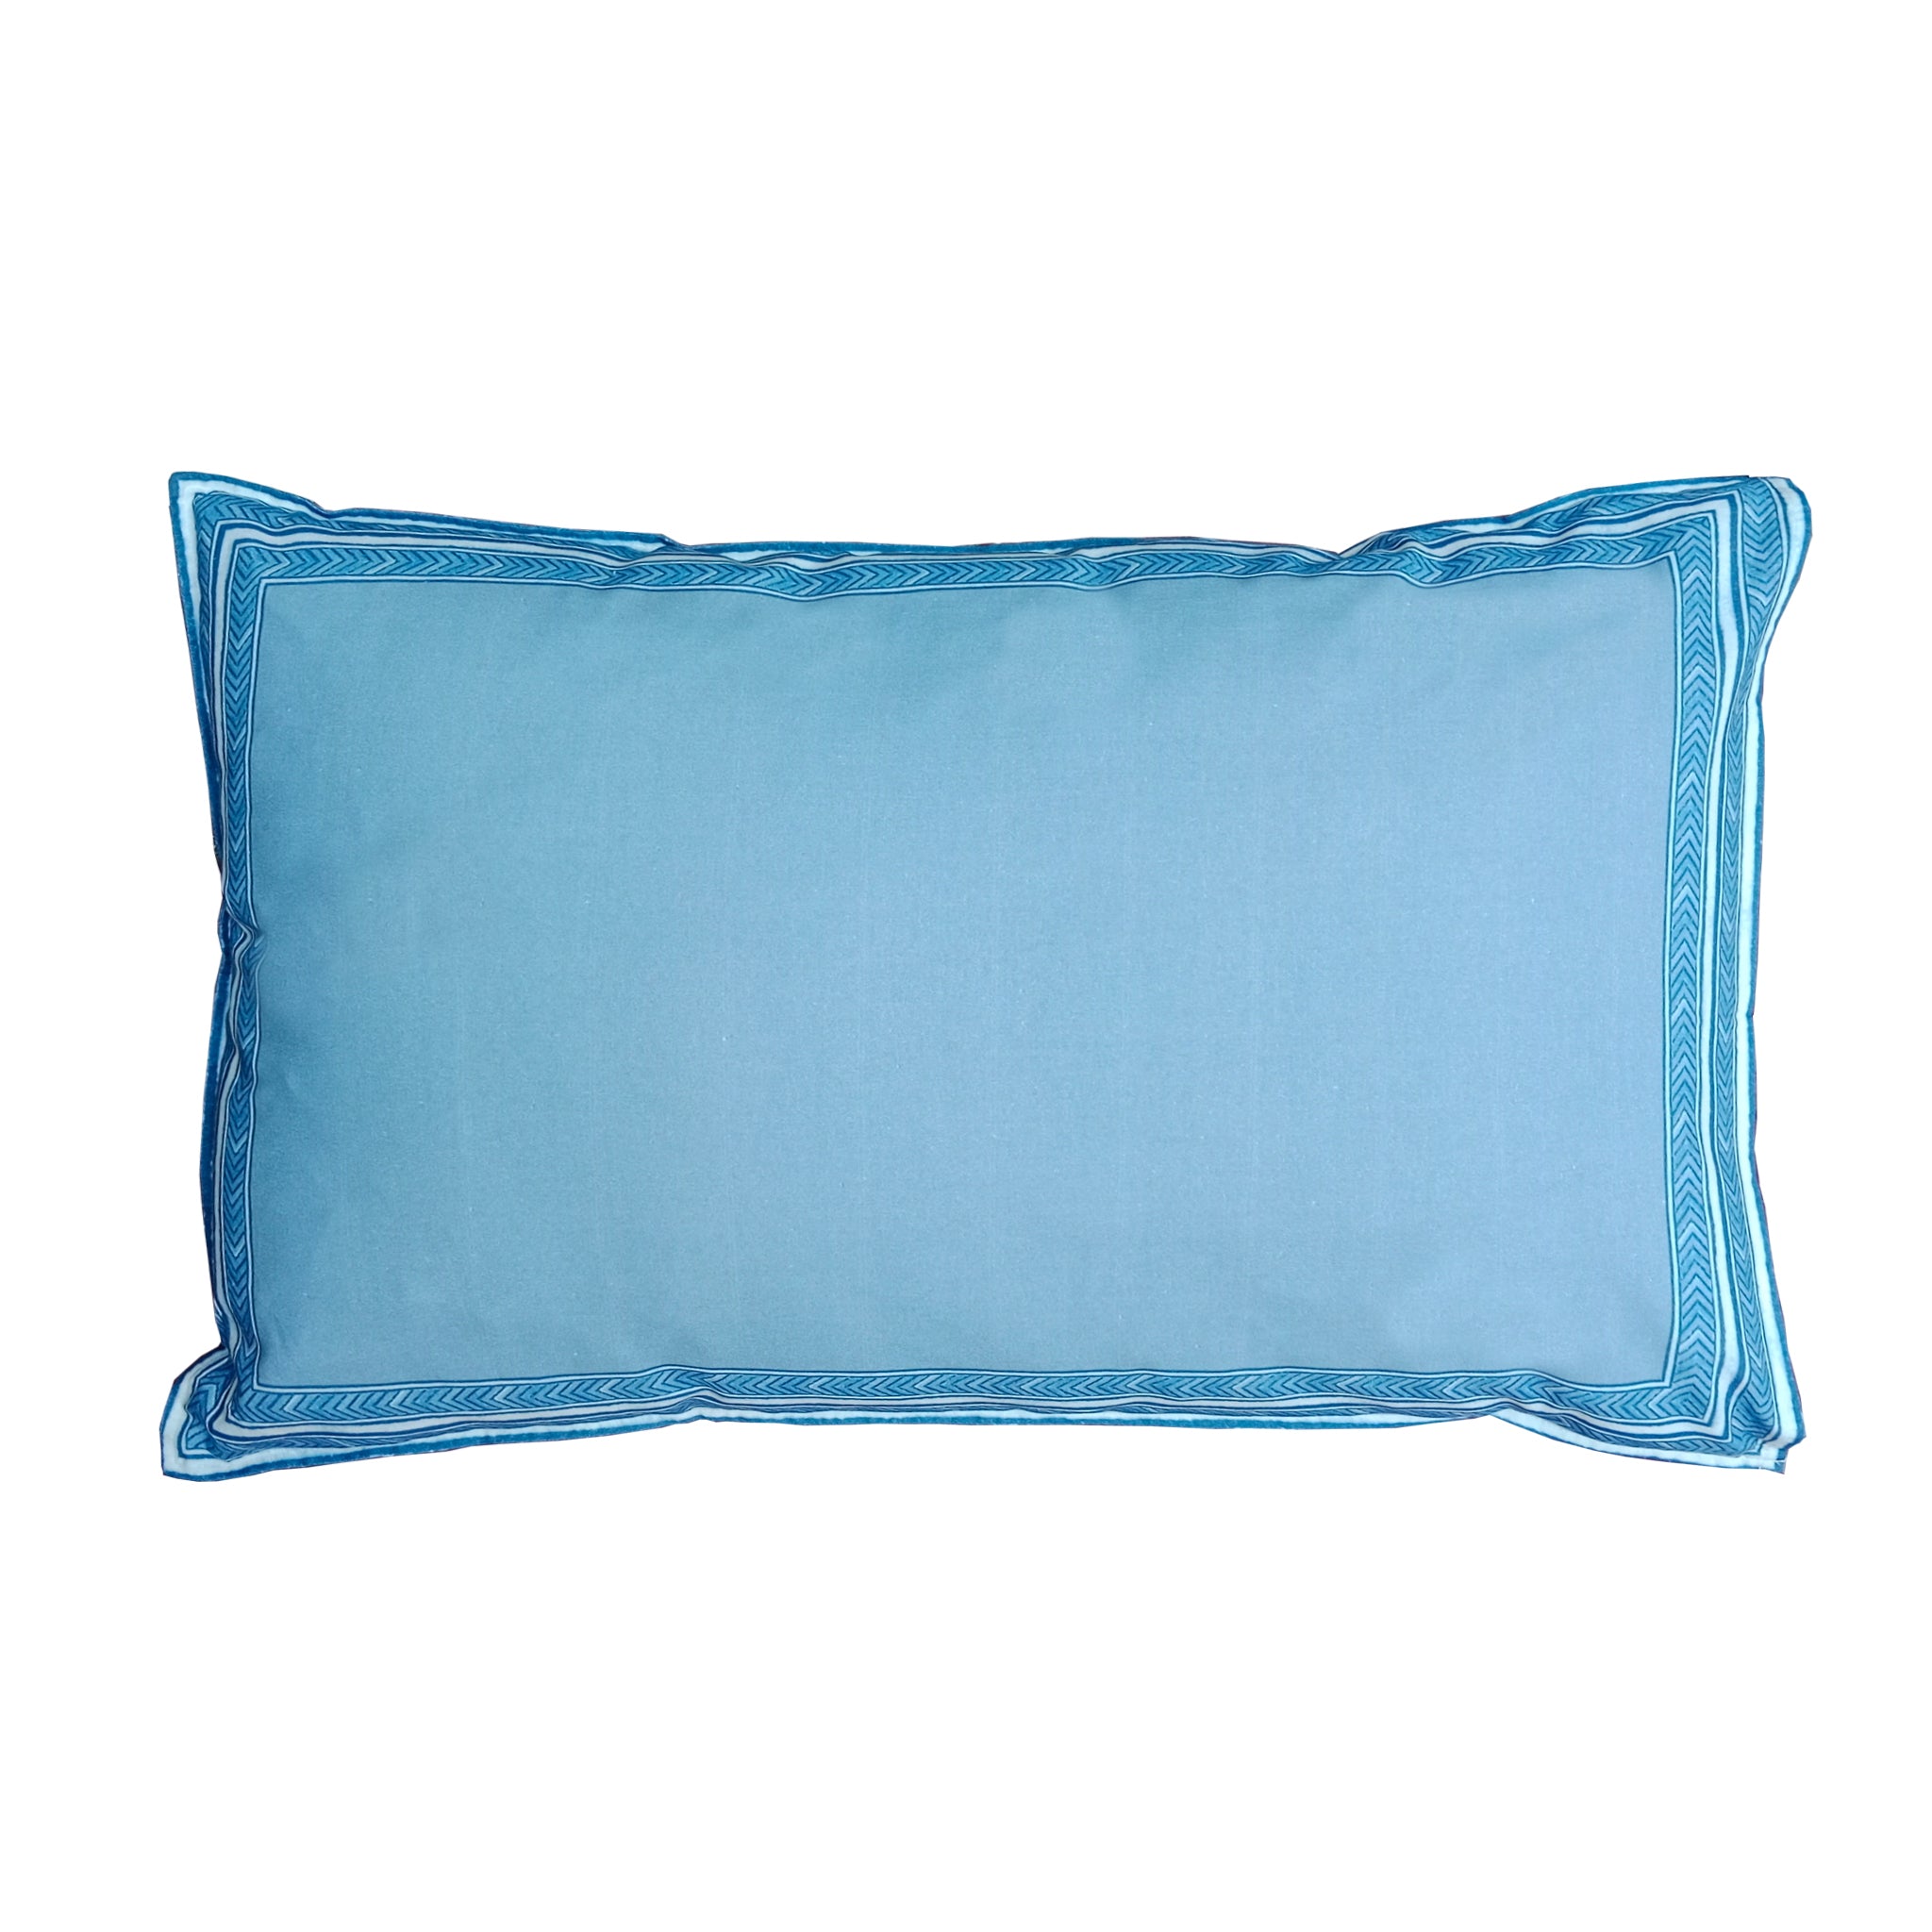 Pillow Cover - Patta and Salli Tempest Blue